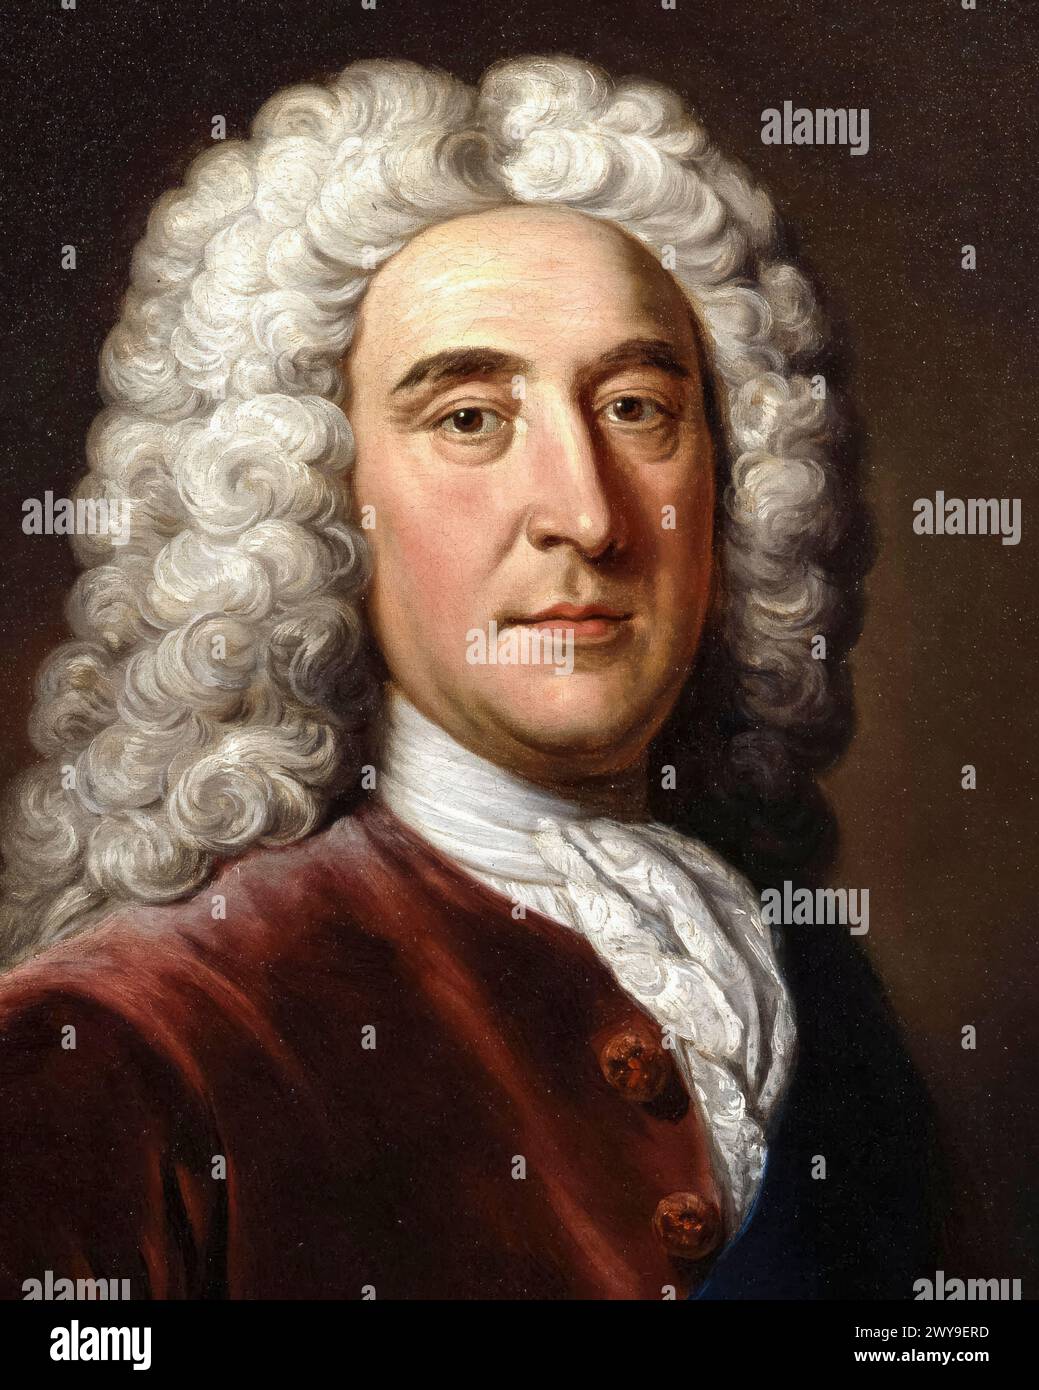 Thomas Pelham-Holles, 1st Duke of Newcastle upon Tyne (1693-1768), Whig politician and Prime Minister of Great Britain twice from 1754-1756 and 1757-1762, portrait painting in oil on canvas by William Hoare, circa 1752 Stock Photo